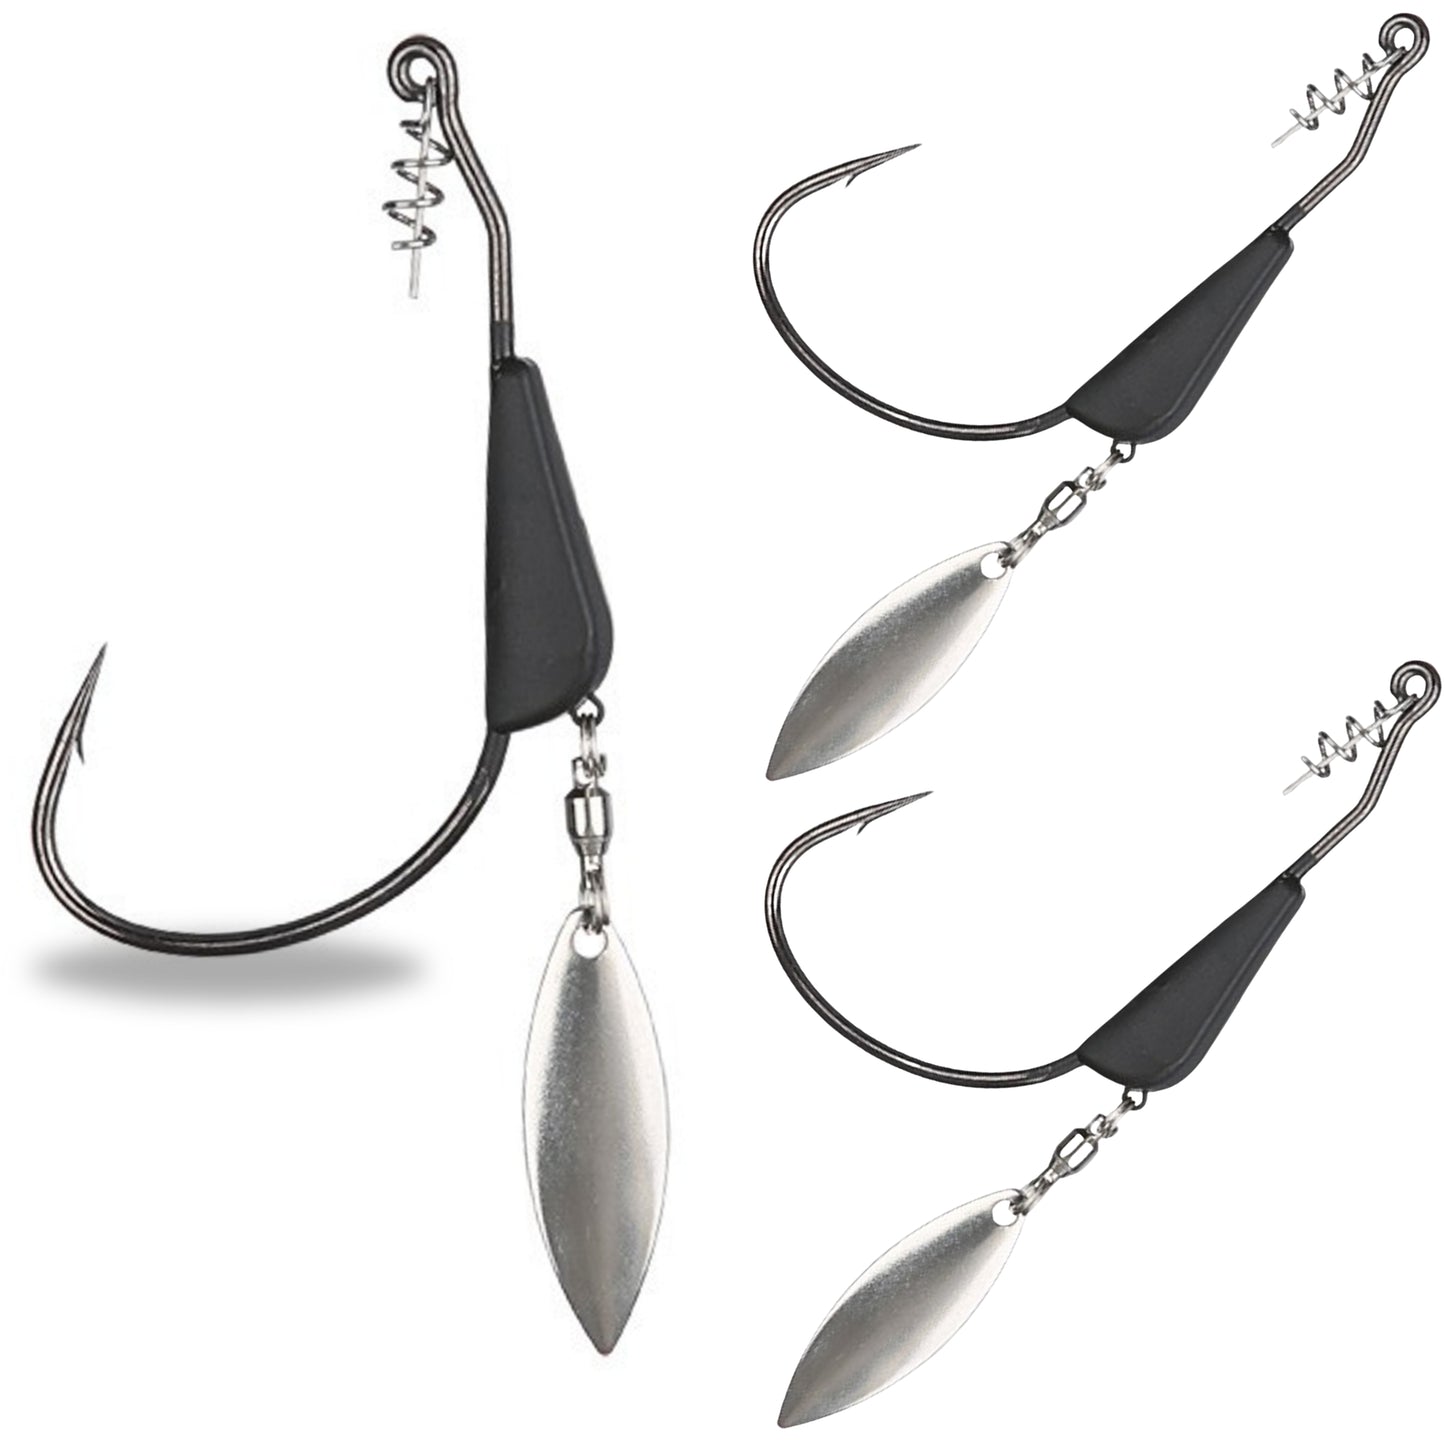 Reaction Tackle Bladed/Tungsten Weighted Swimbait Hooks (3-PACK)